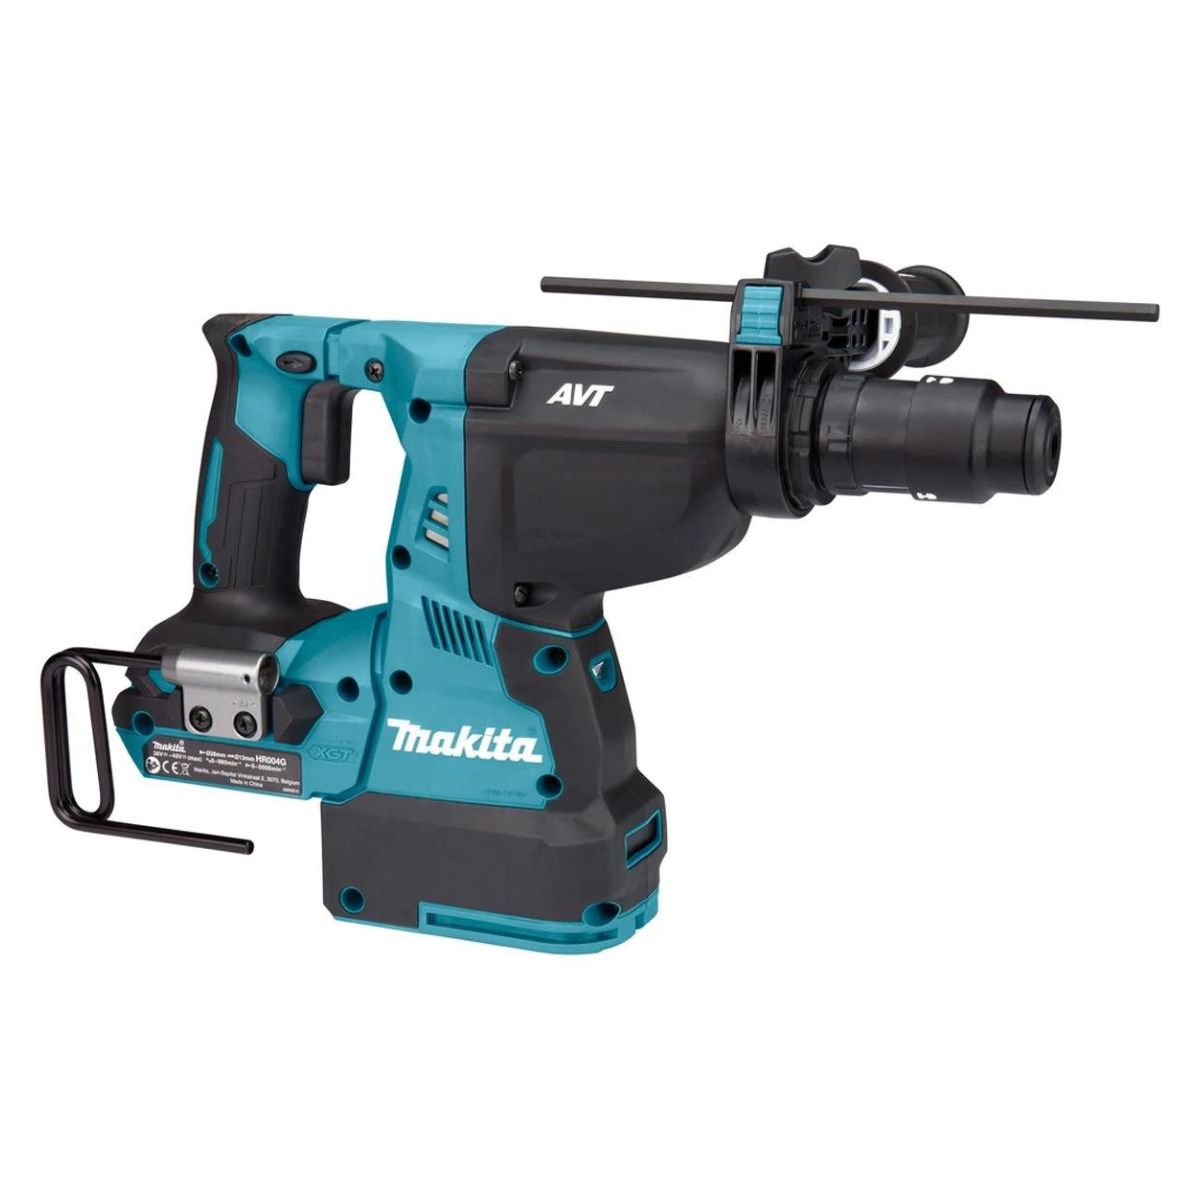 Makita HR004GZ02 40Vmax XGT Brushless SDS Plus Rotary Hammer Drill Body Only with Case